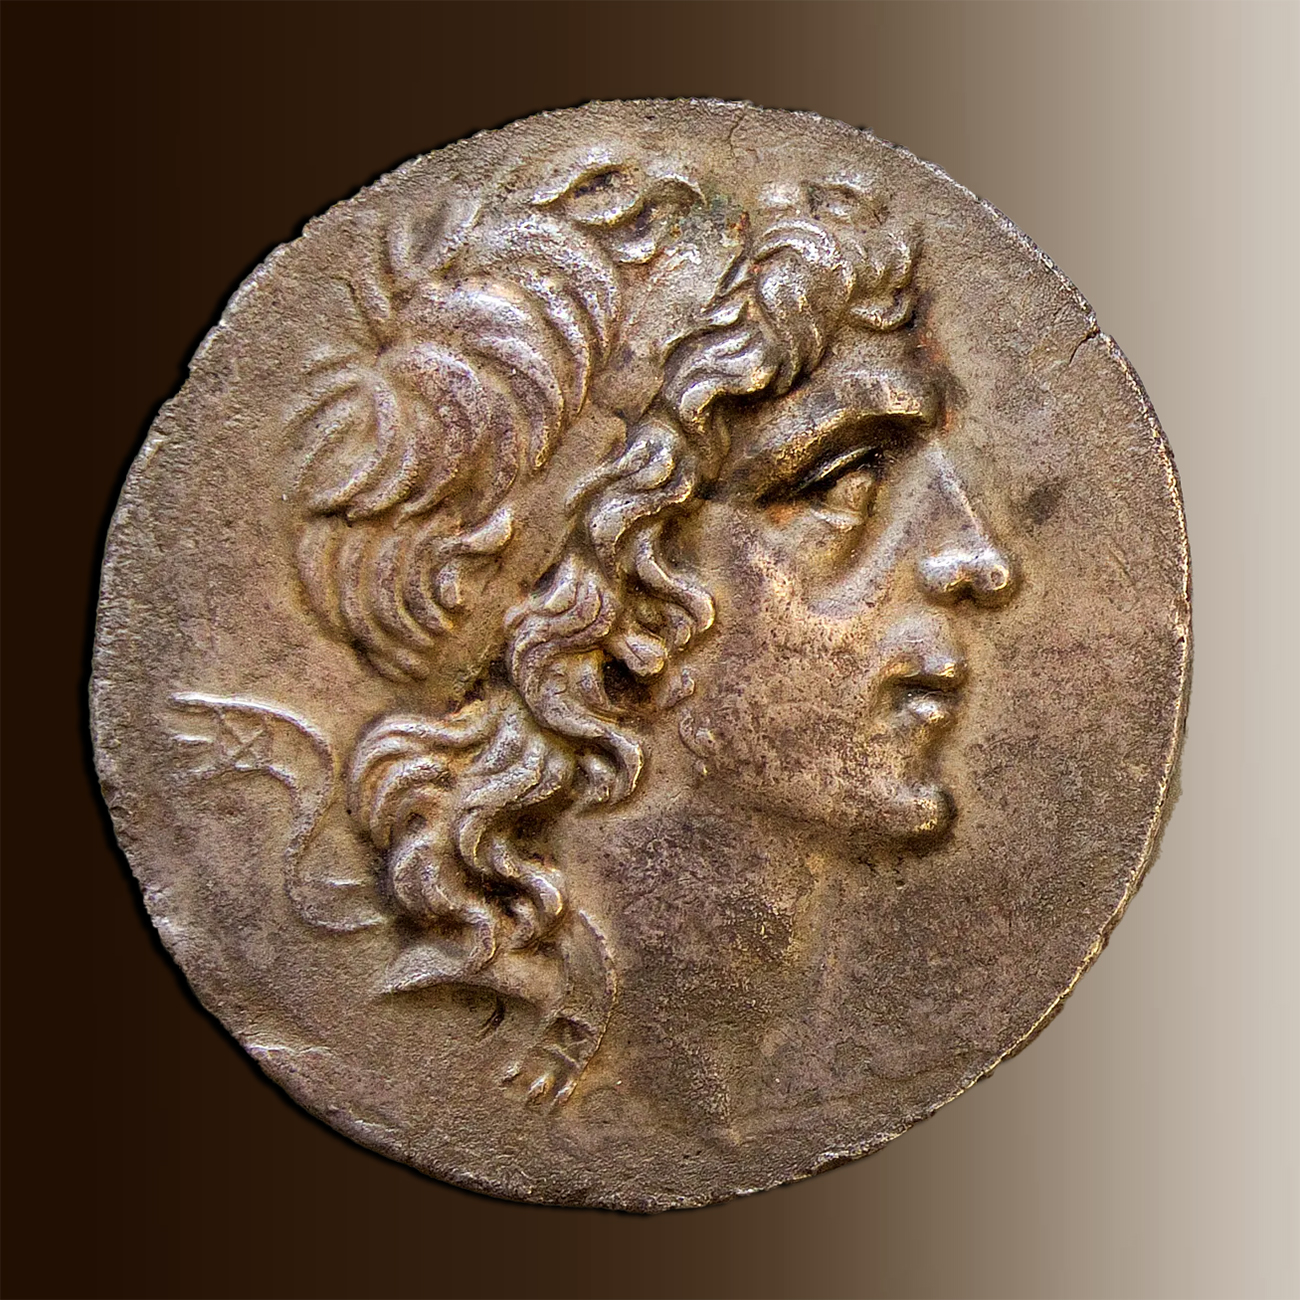 A close-up image of a silver coin from 2nd–1st century BCE featuring a profile view of Mithradates VI Eupator, the King of Pontus, with detailed curly hair and a prominent facial structure.